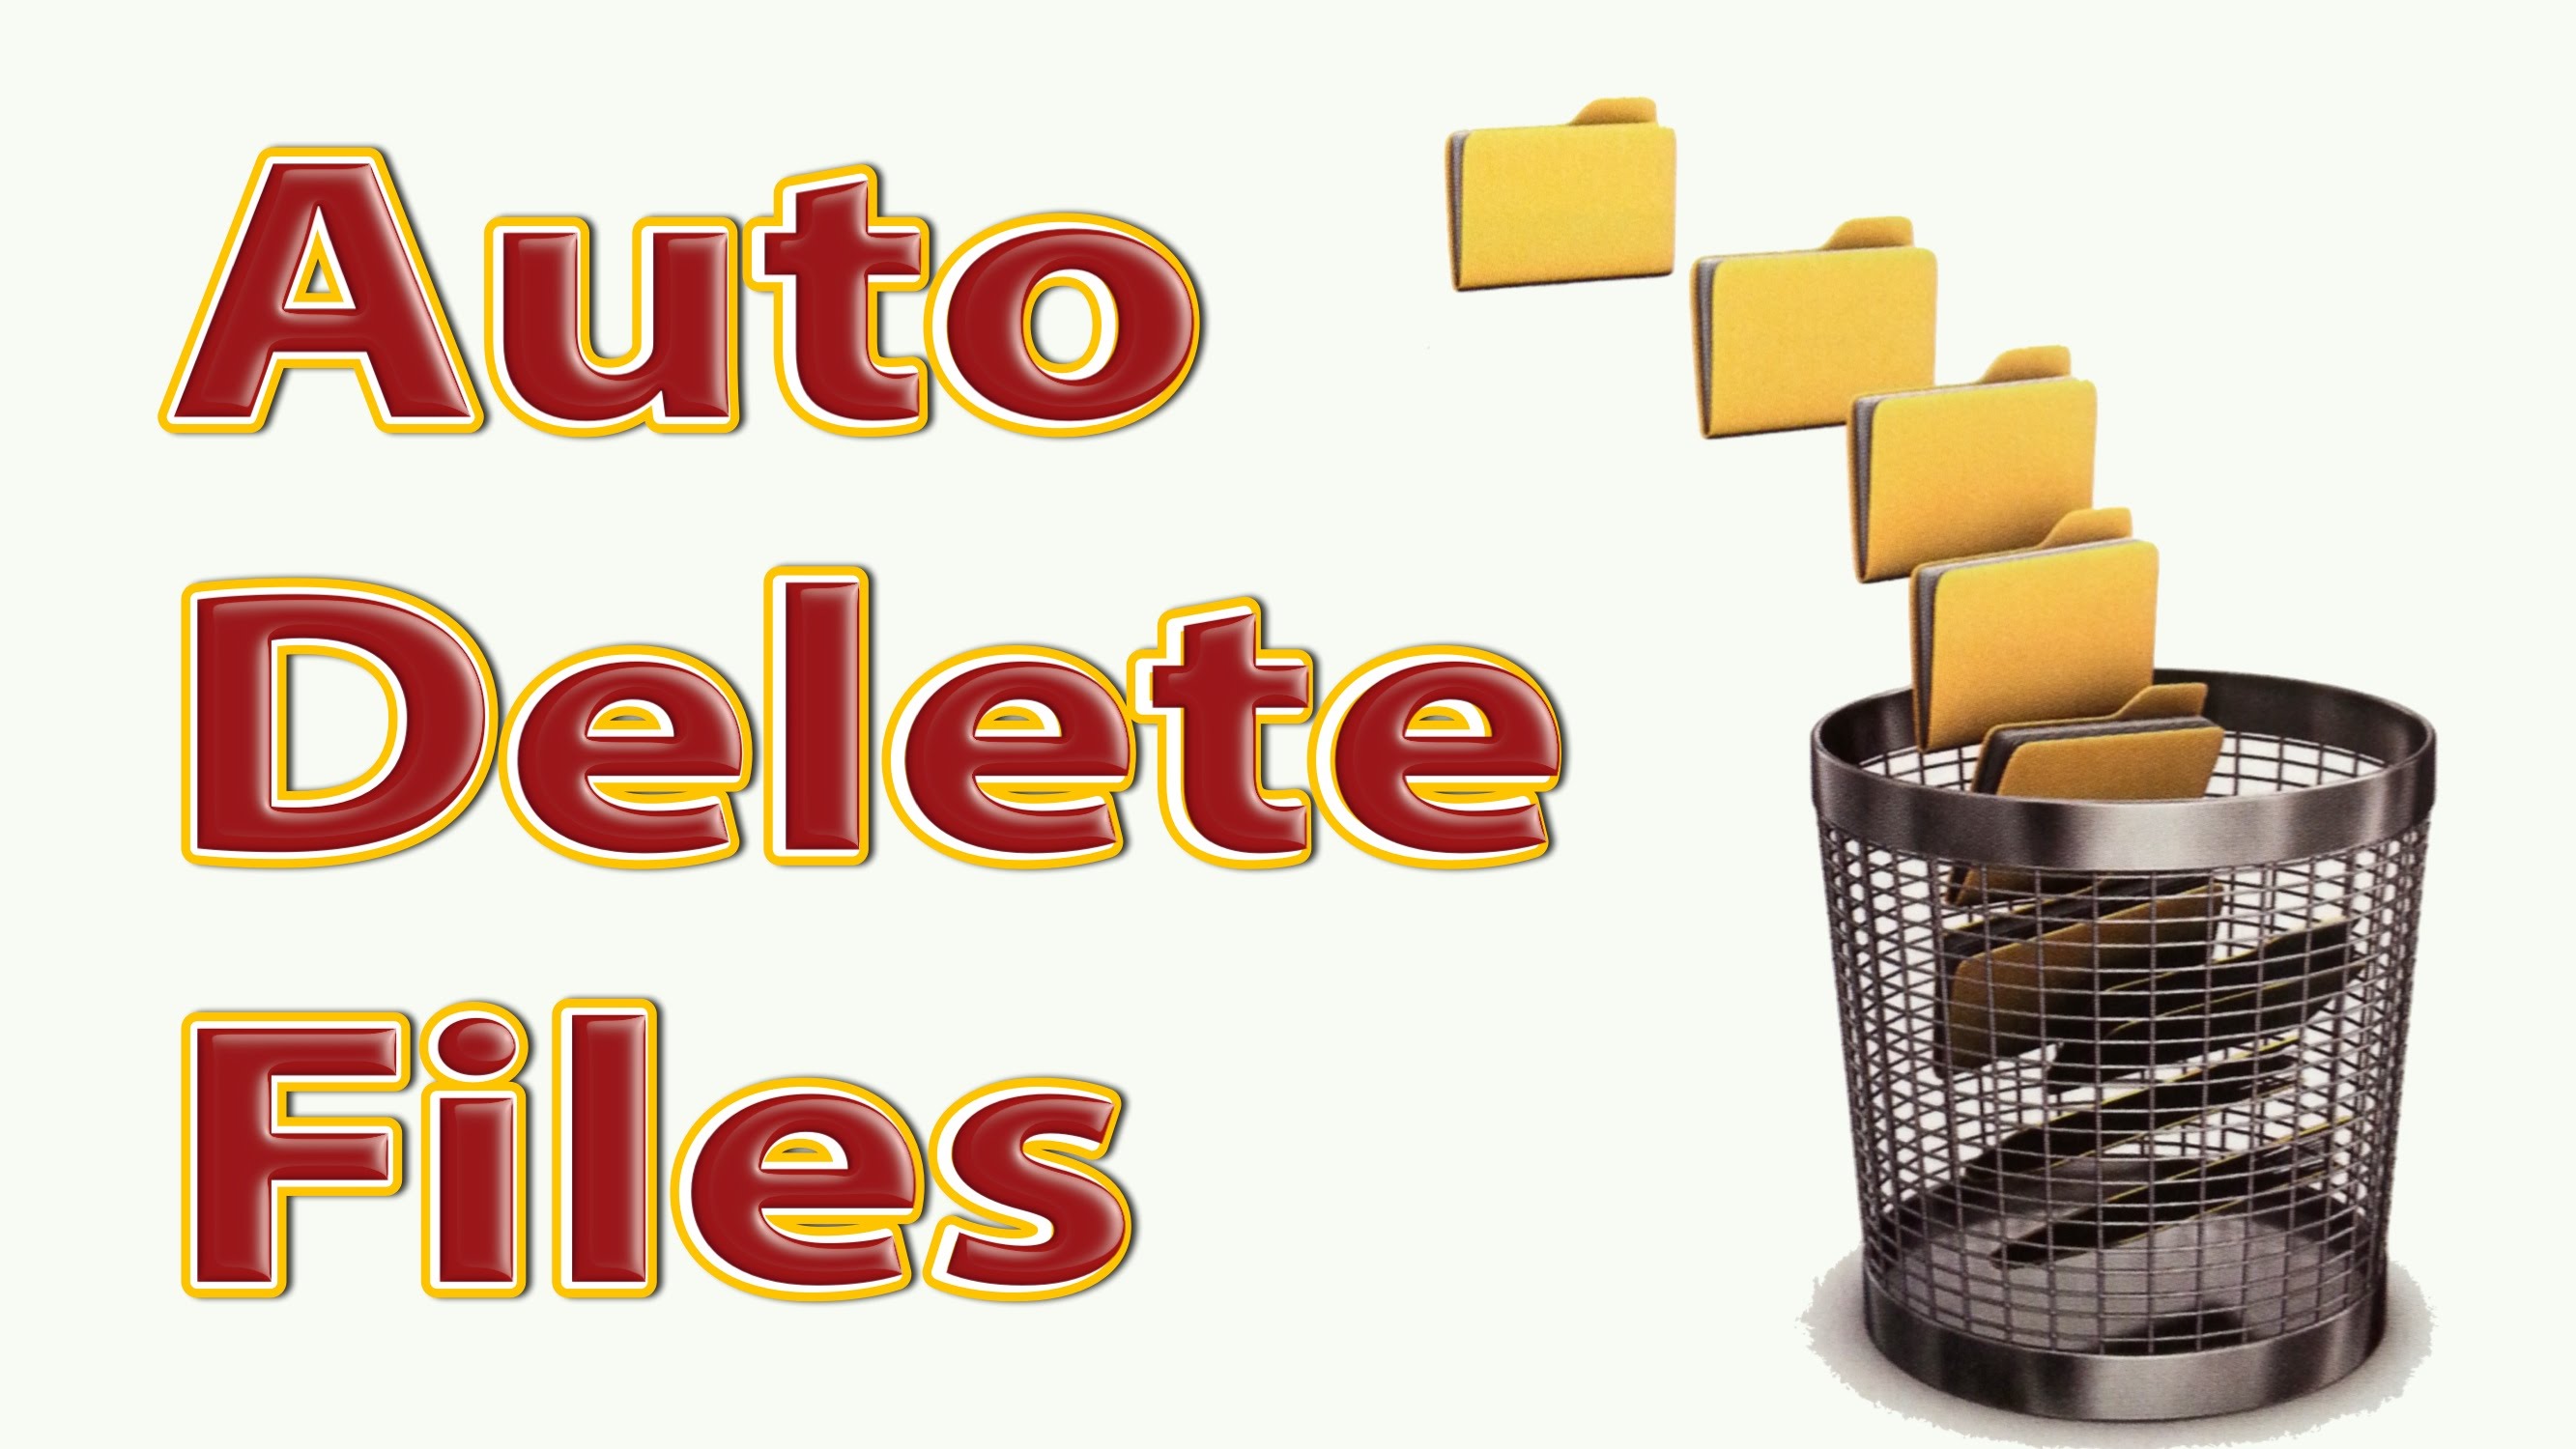 You are currently viewing How to Self Destruct Files, Auto Delete Files and Folders (Quick Crypt9